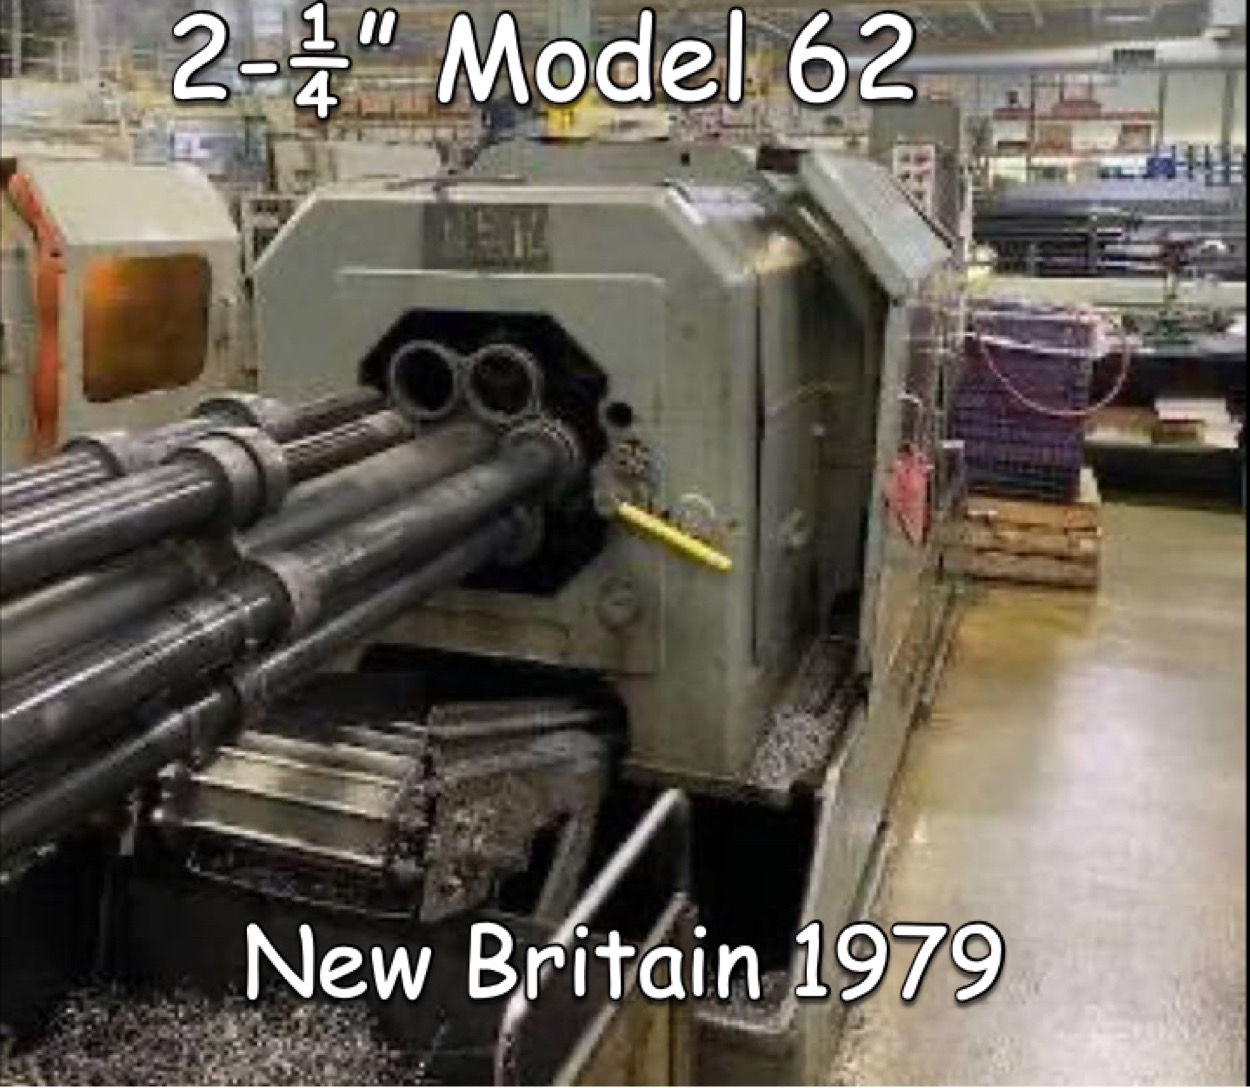  New Britain Model 62 Multi Spindle Bar 6 Spindle 1979